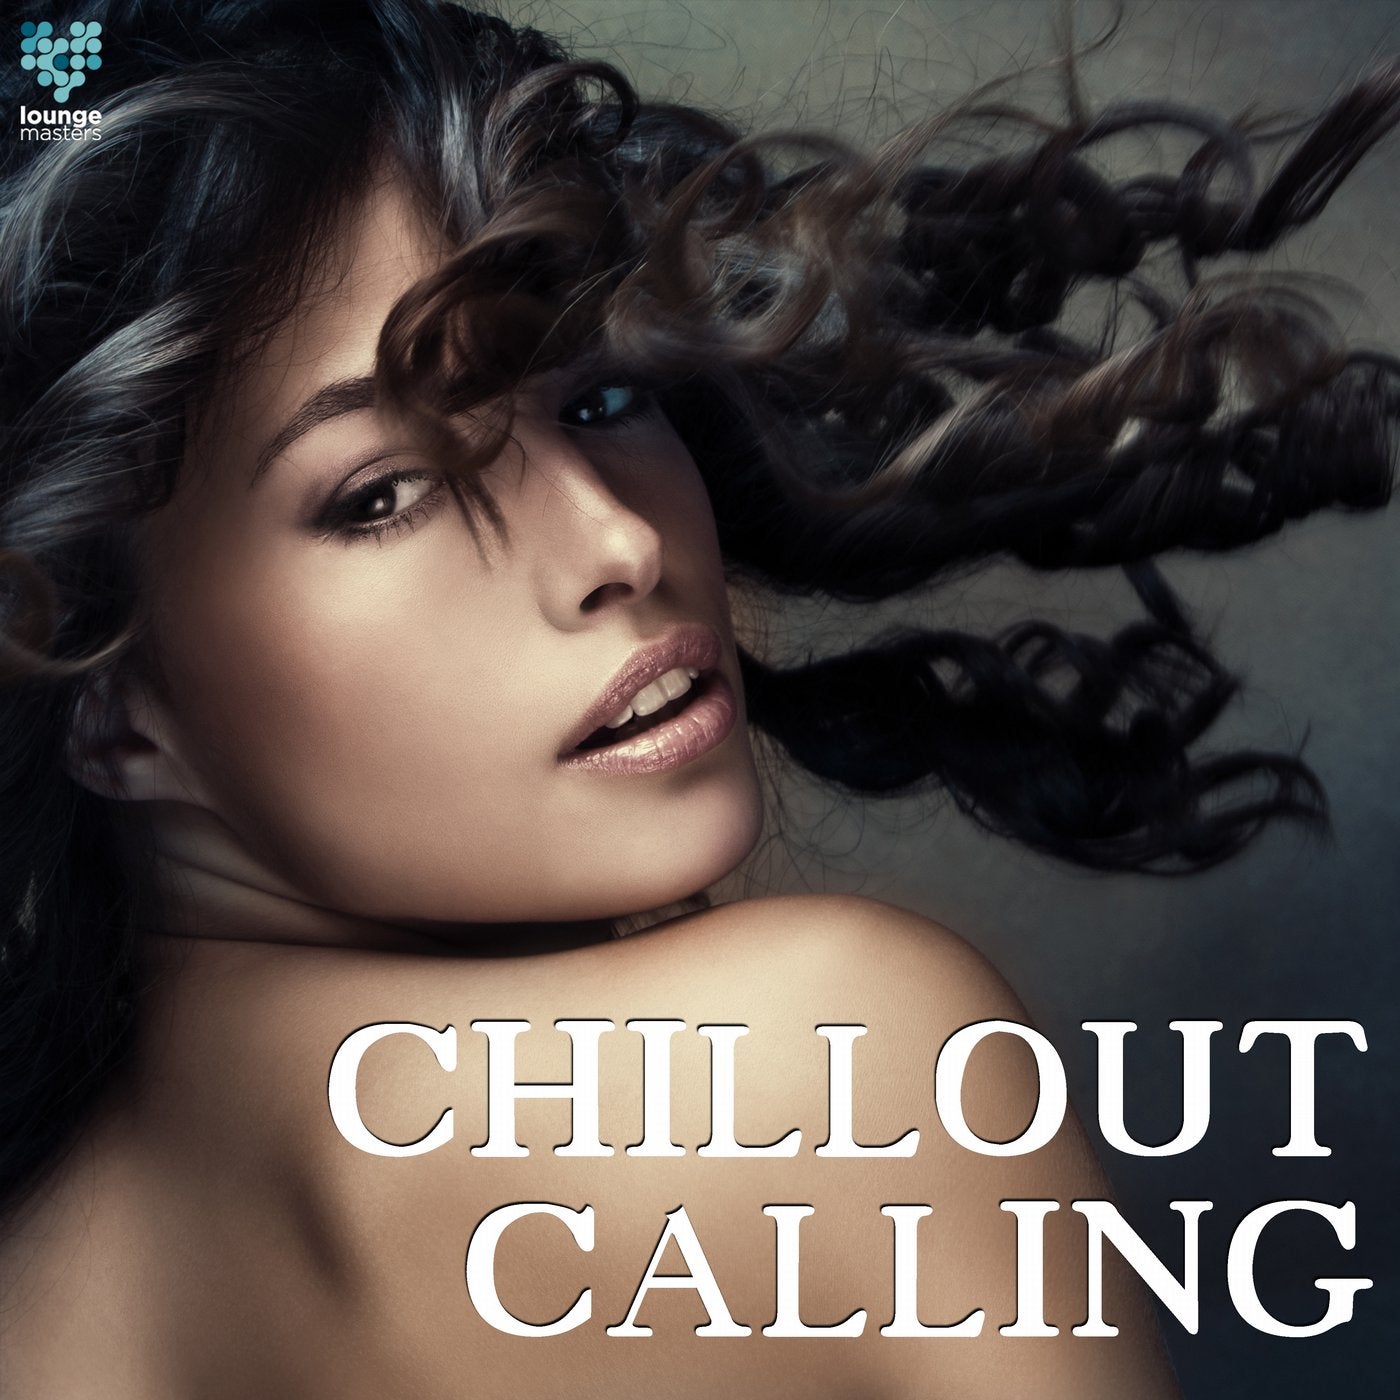 Chillout Calling